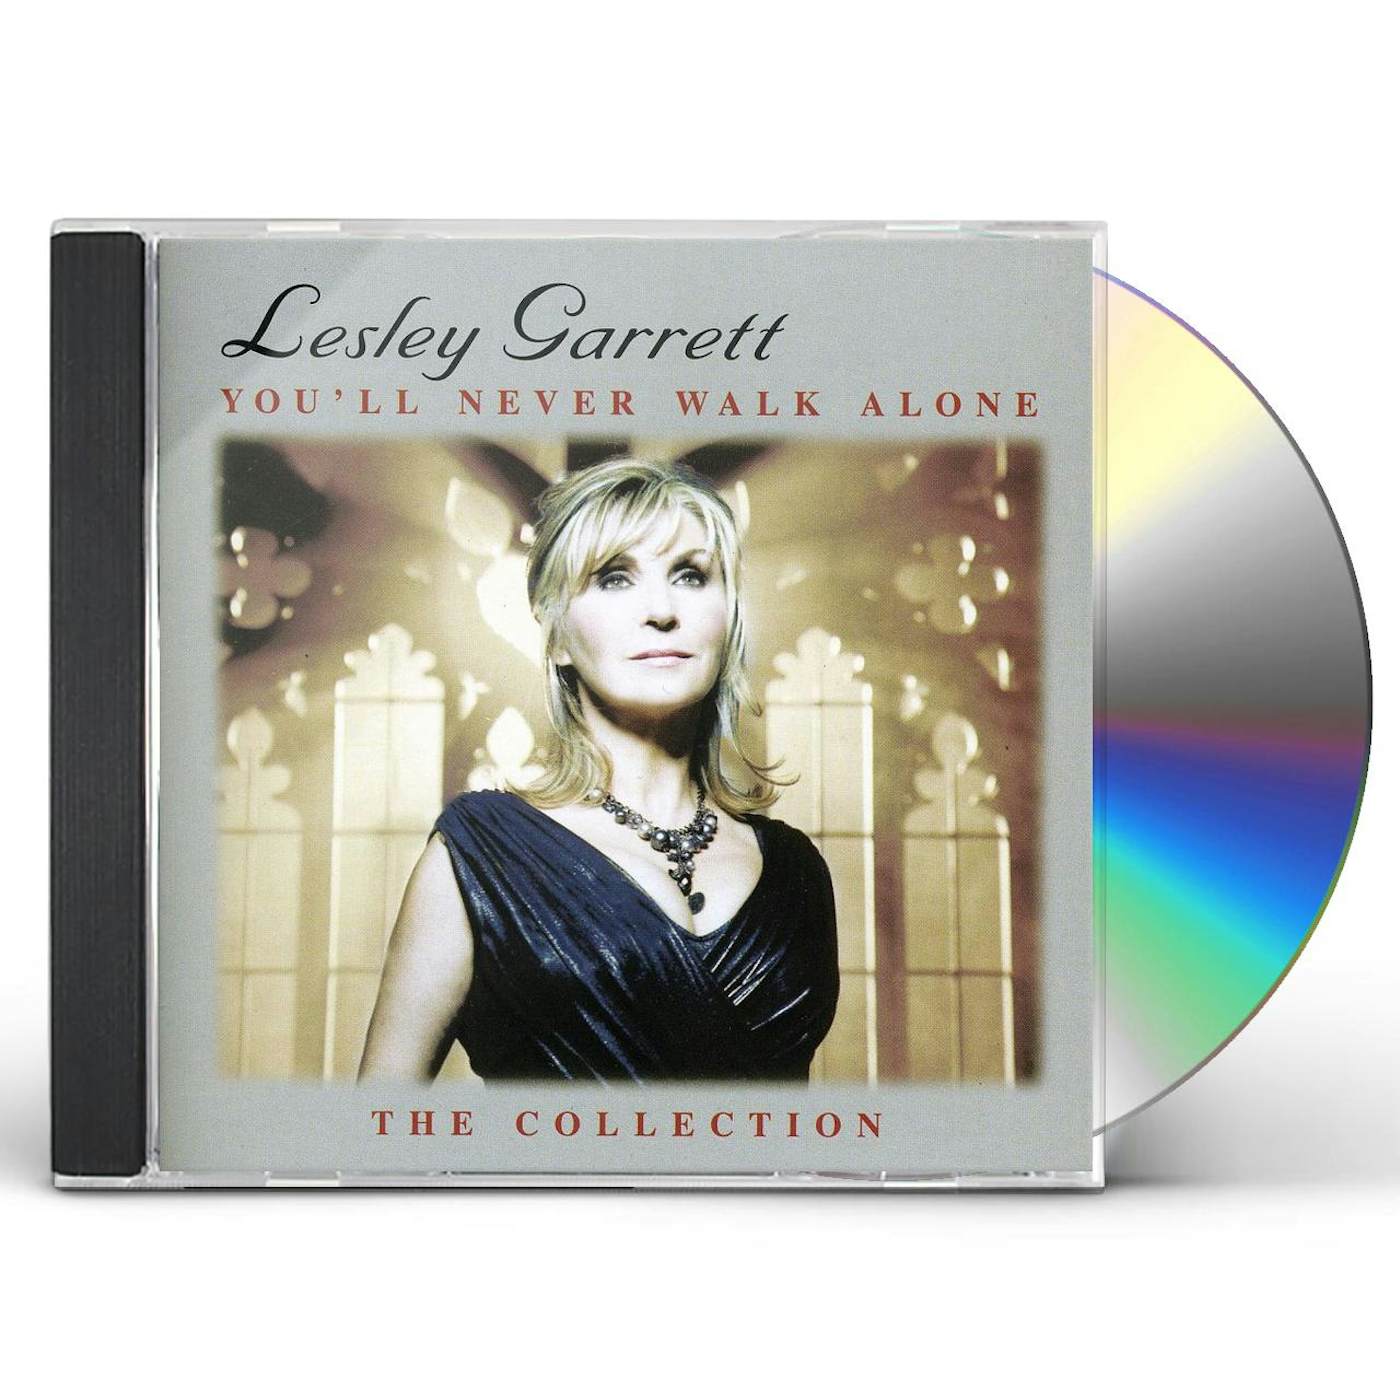 Lesley Garrett YOULL NEVER WALK ALONE: COLLECTION CD